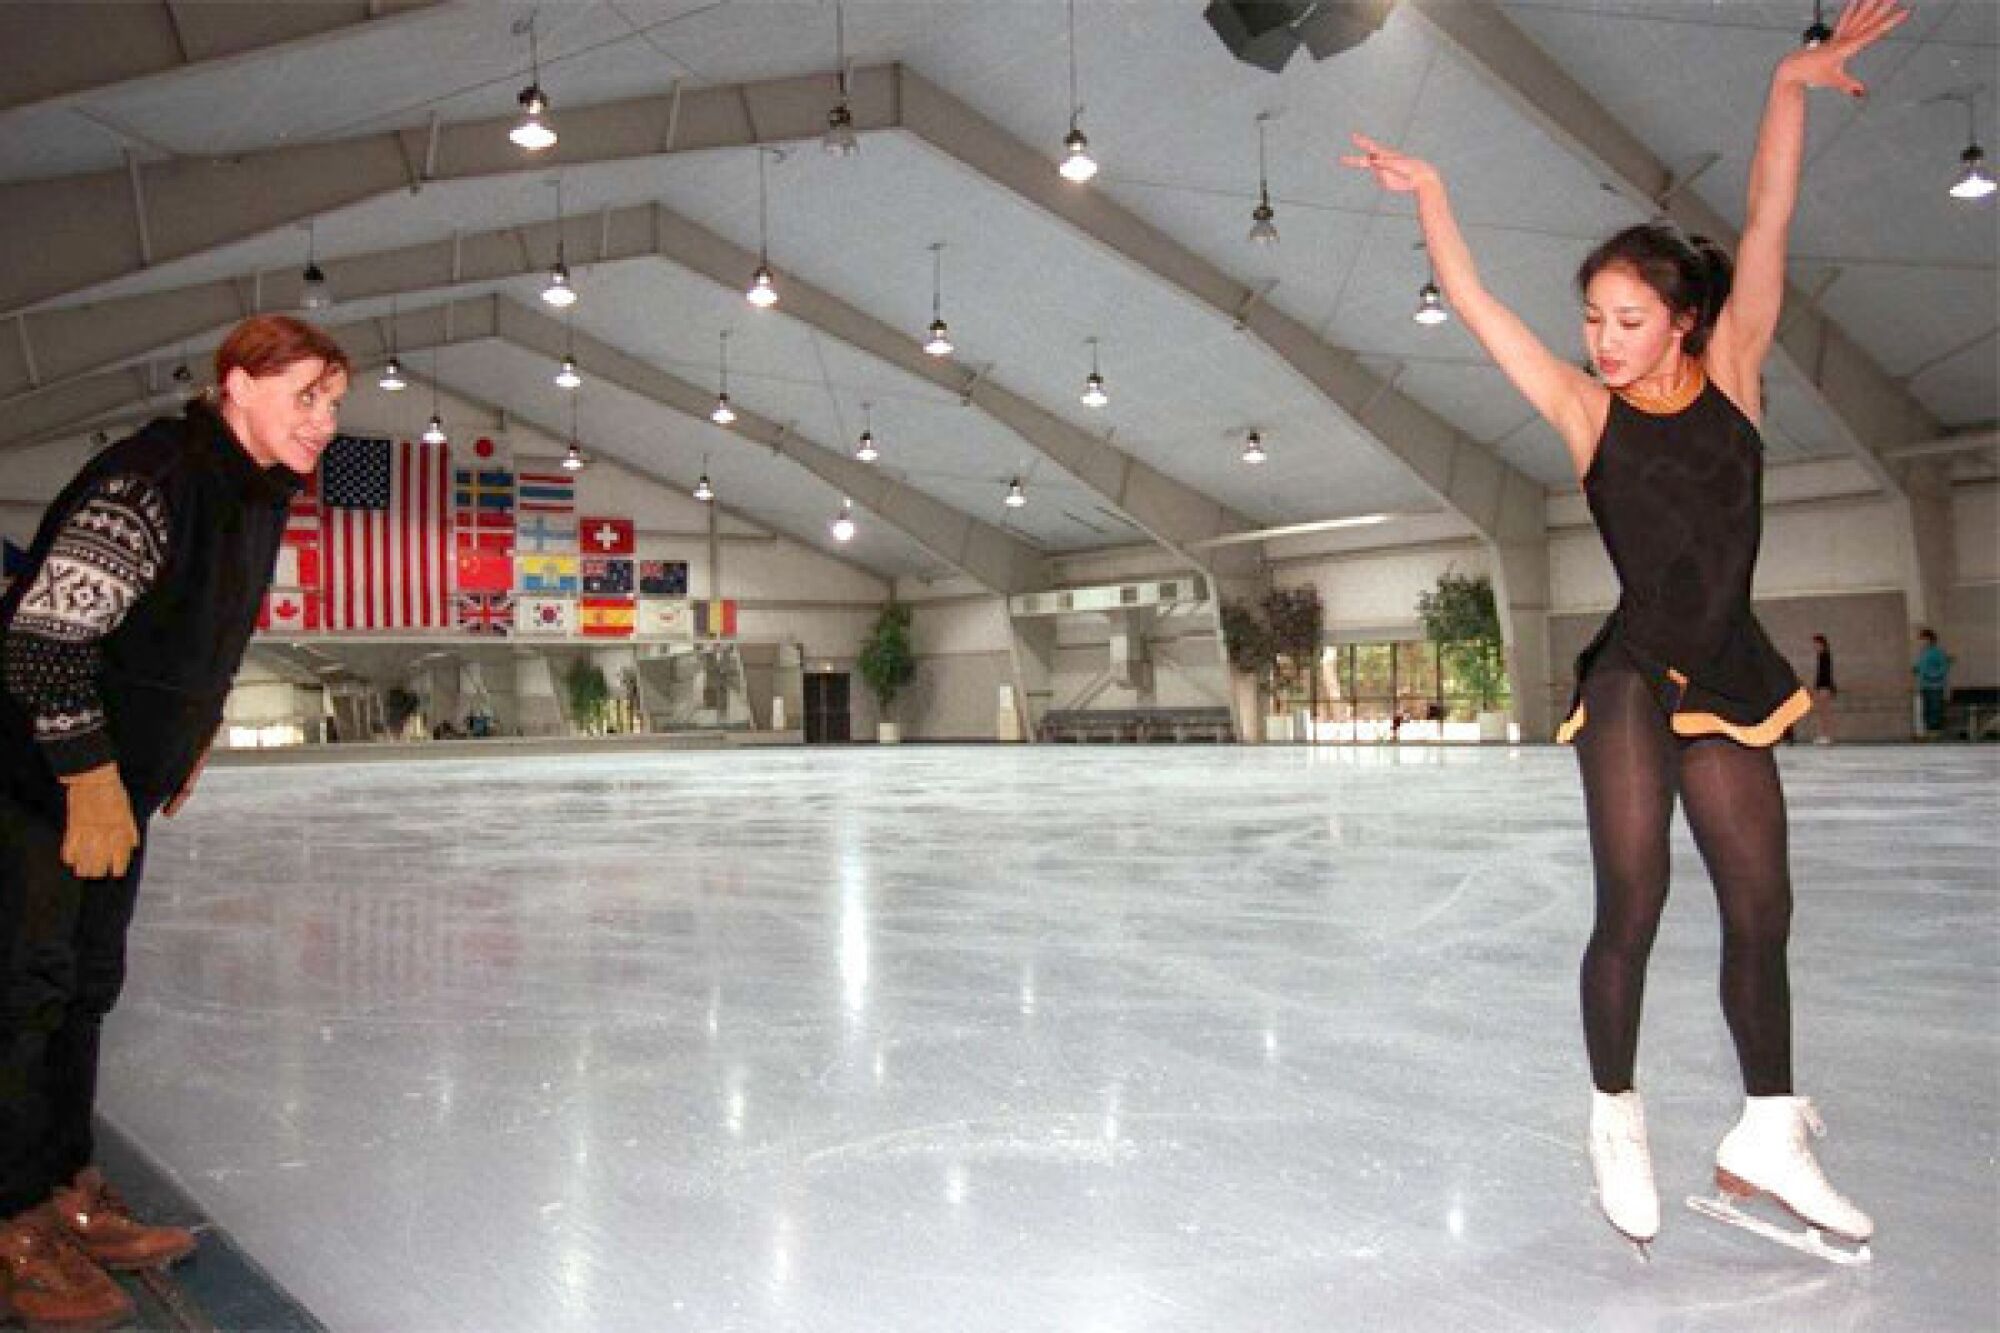 Michelle Kwan works on her choreography with Elena Tcherkasskaia at Ice Castle International Training Center in Lake Arrowhead in 1996. Kwan went on to win the silver medal at the 1998 Winter Olympics.